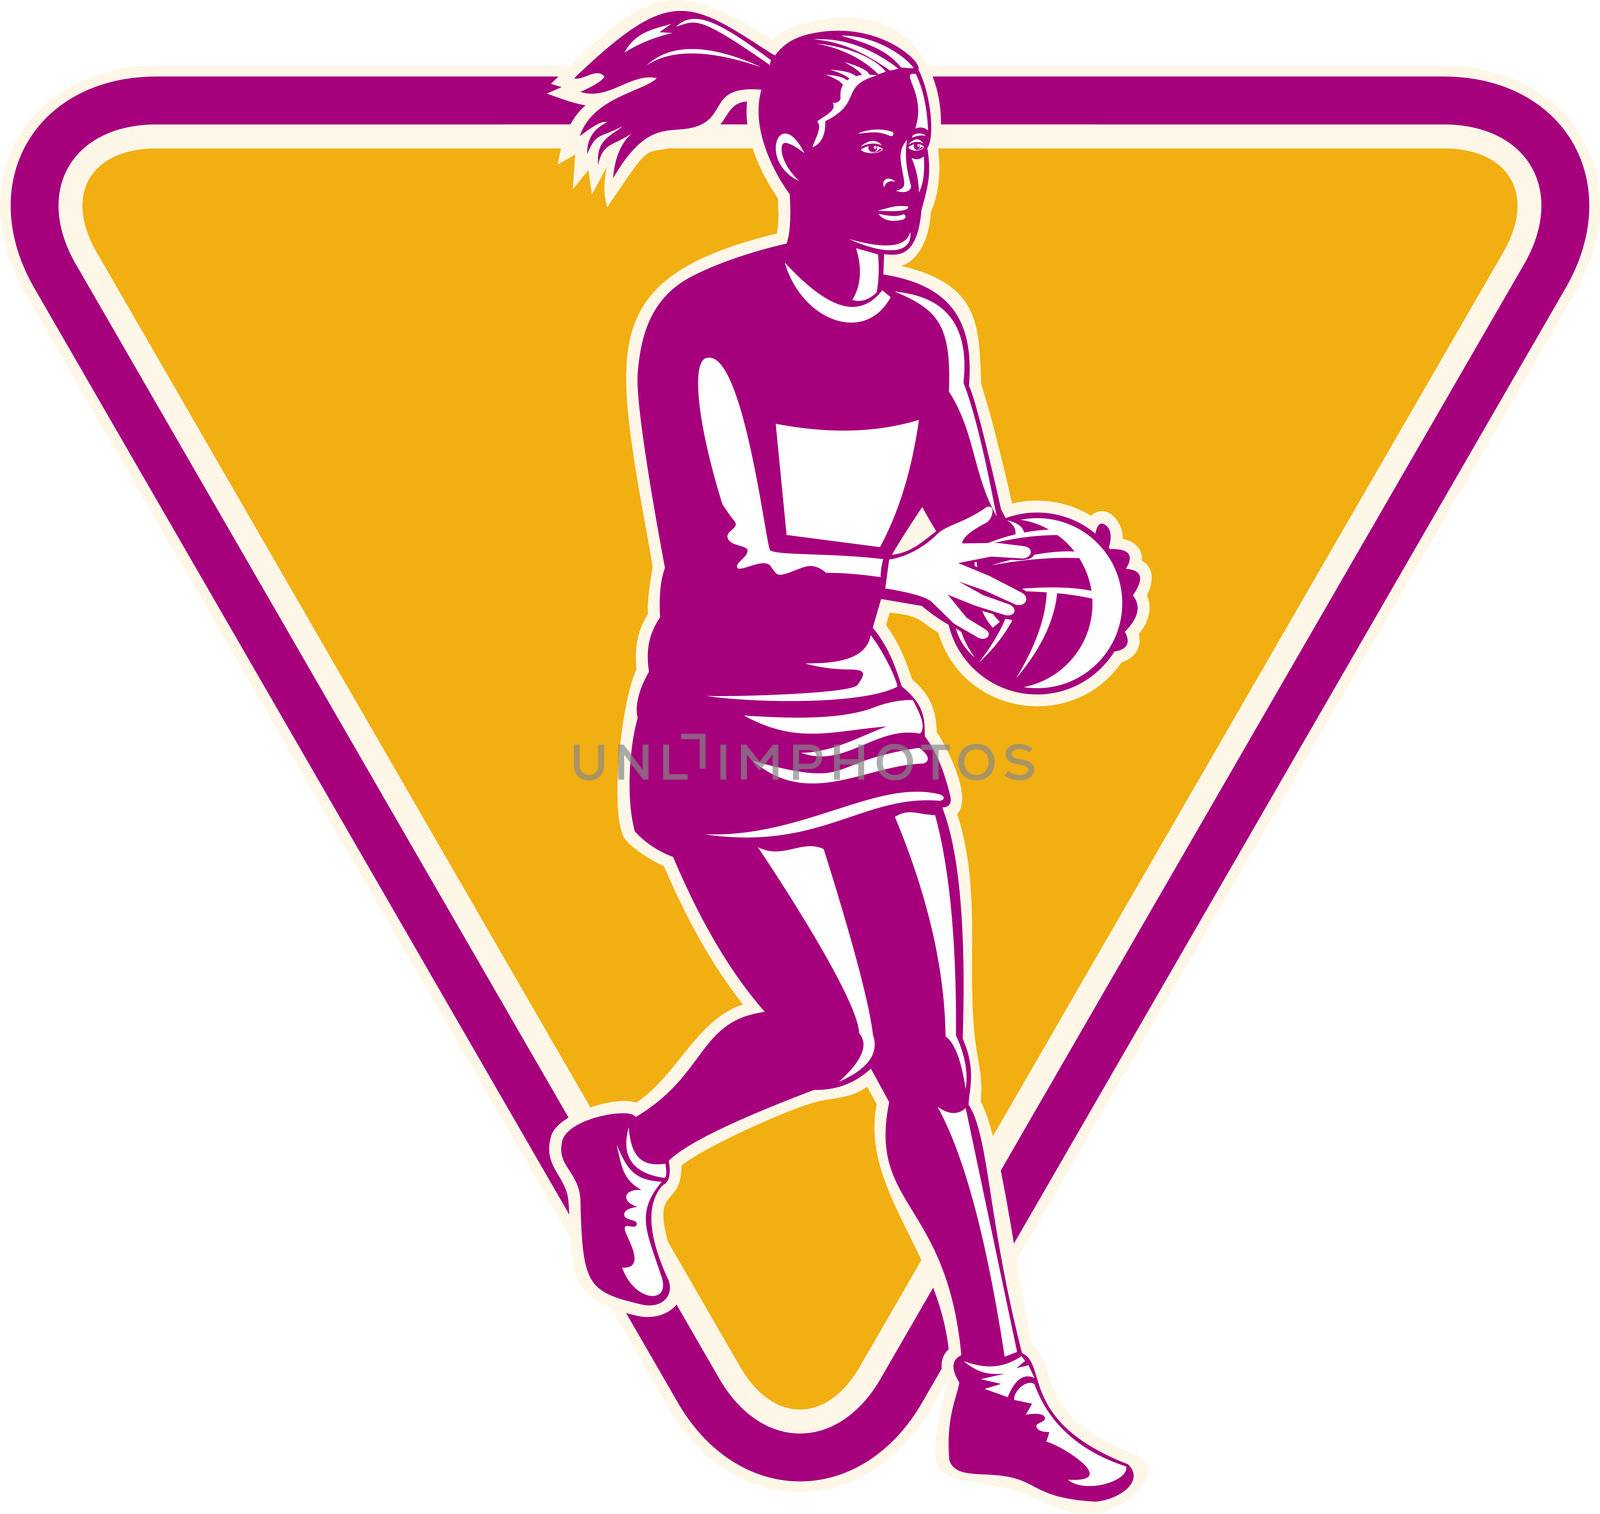  illustration of a netball player ready to pass ball with shield or triangle in the background